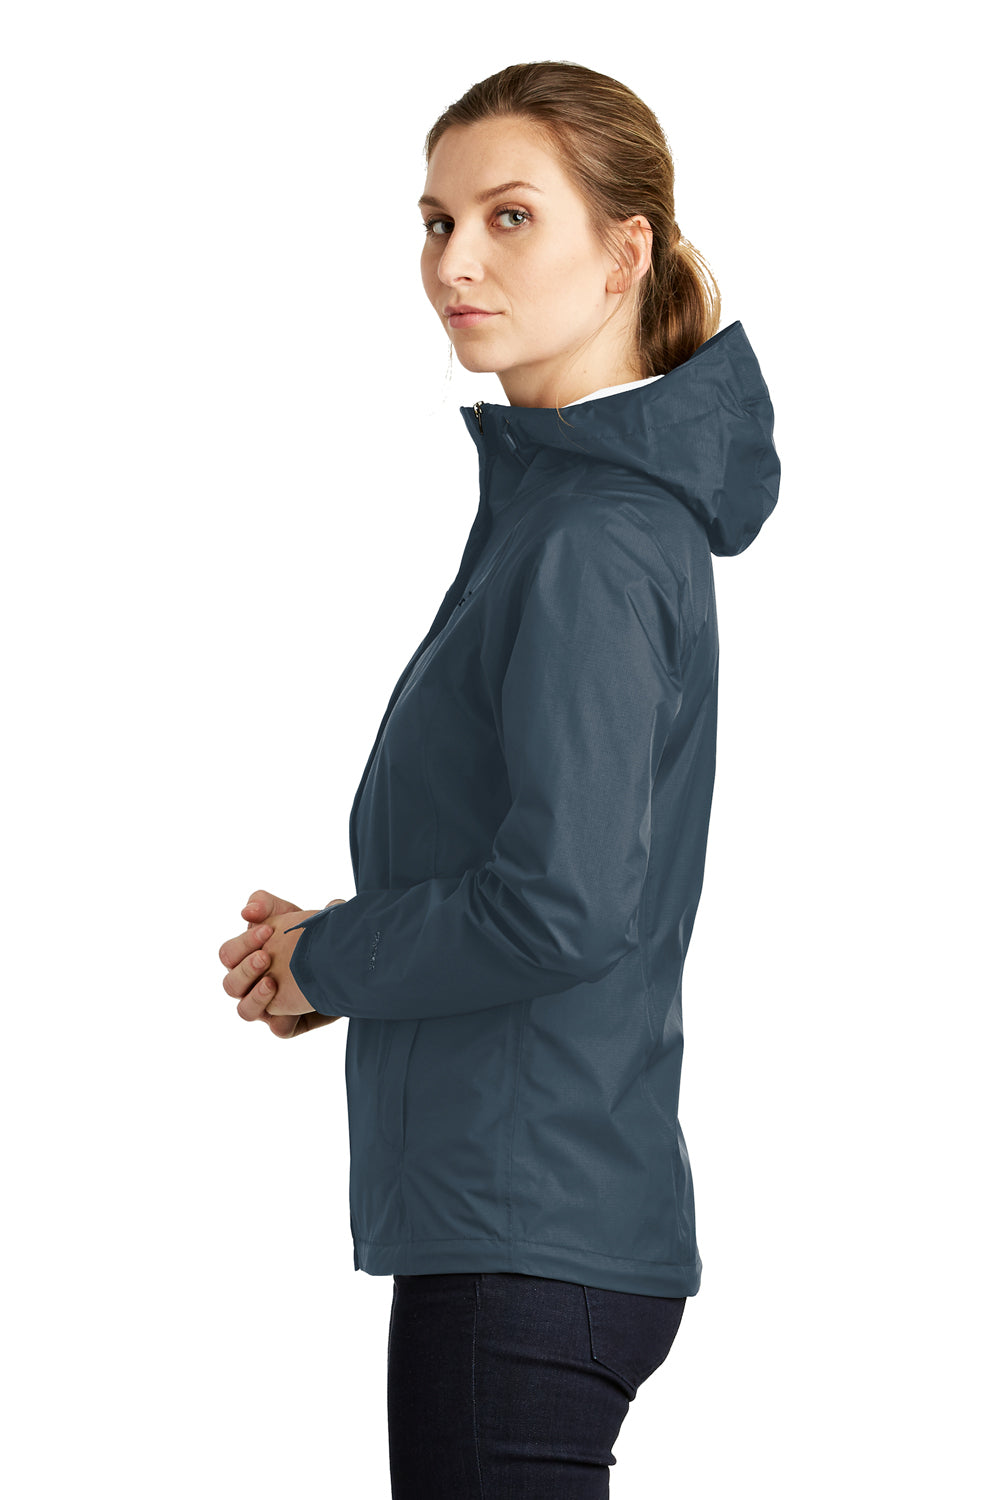 The North Face NF0A3LH5 Womens DryVent Waterproof Full Zip Hooded Jacket Shady Blue Side